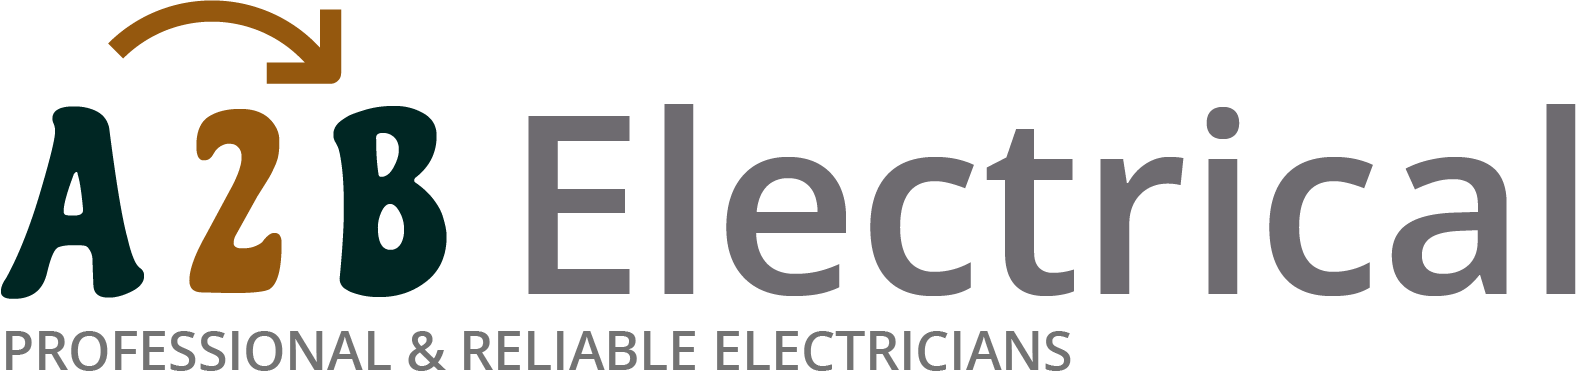 If you have electrical wiring problems in Bury St Edmunds, we can provide an electrician to have a look for you. 